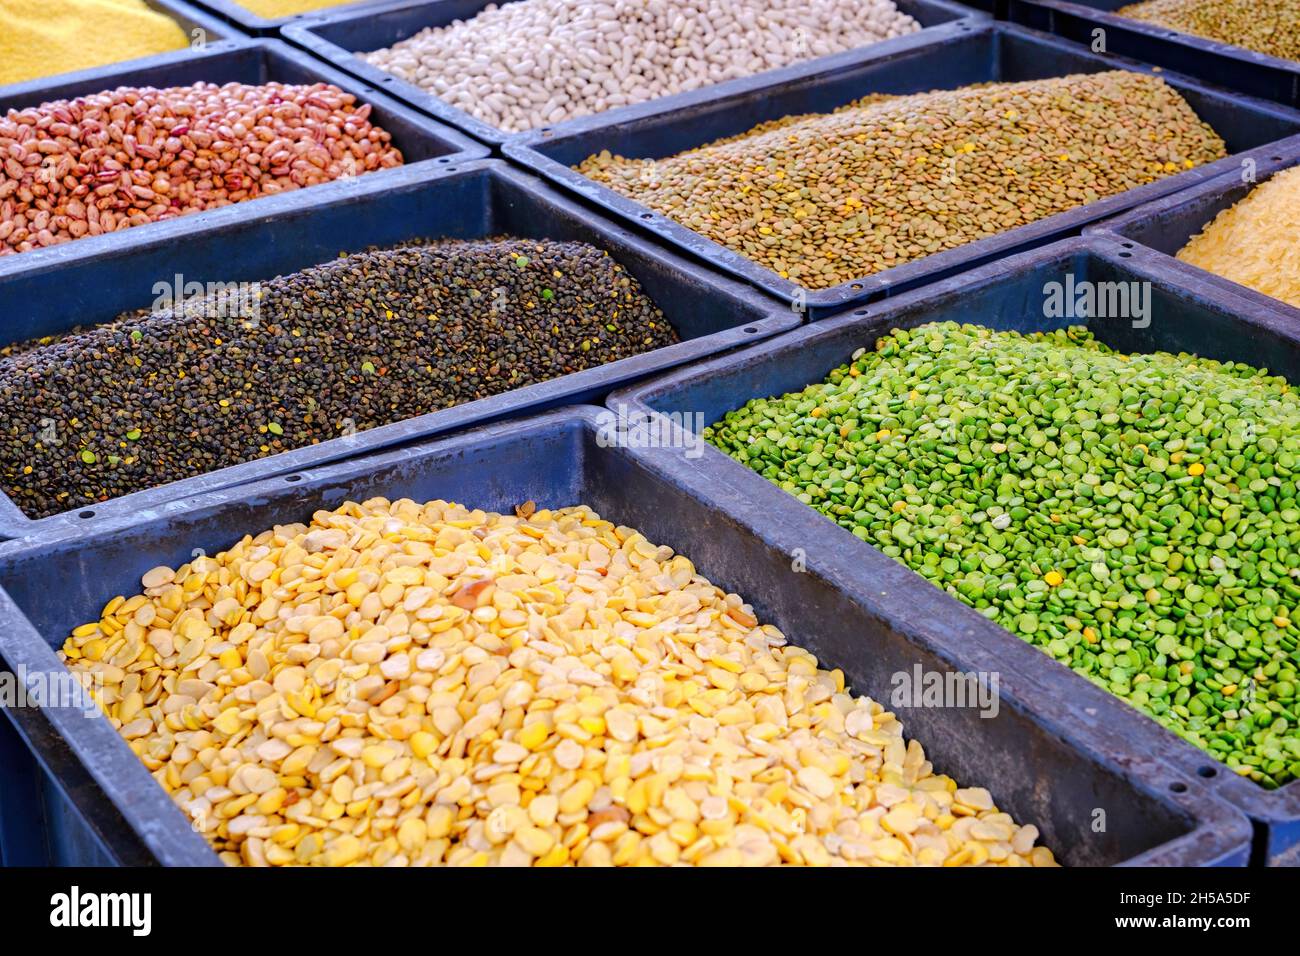 many assorted beans on the market - green, yellow, white, black Stock Photo